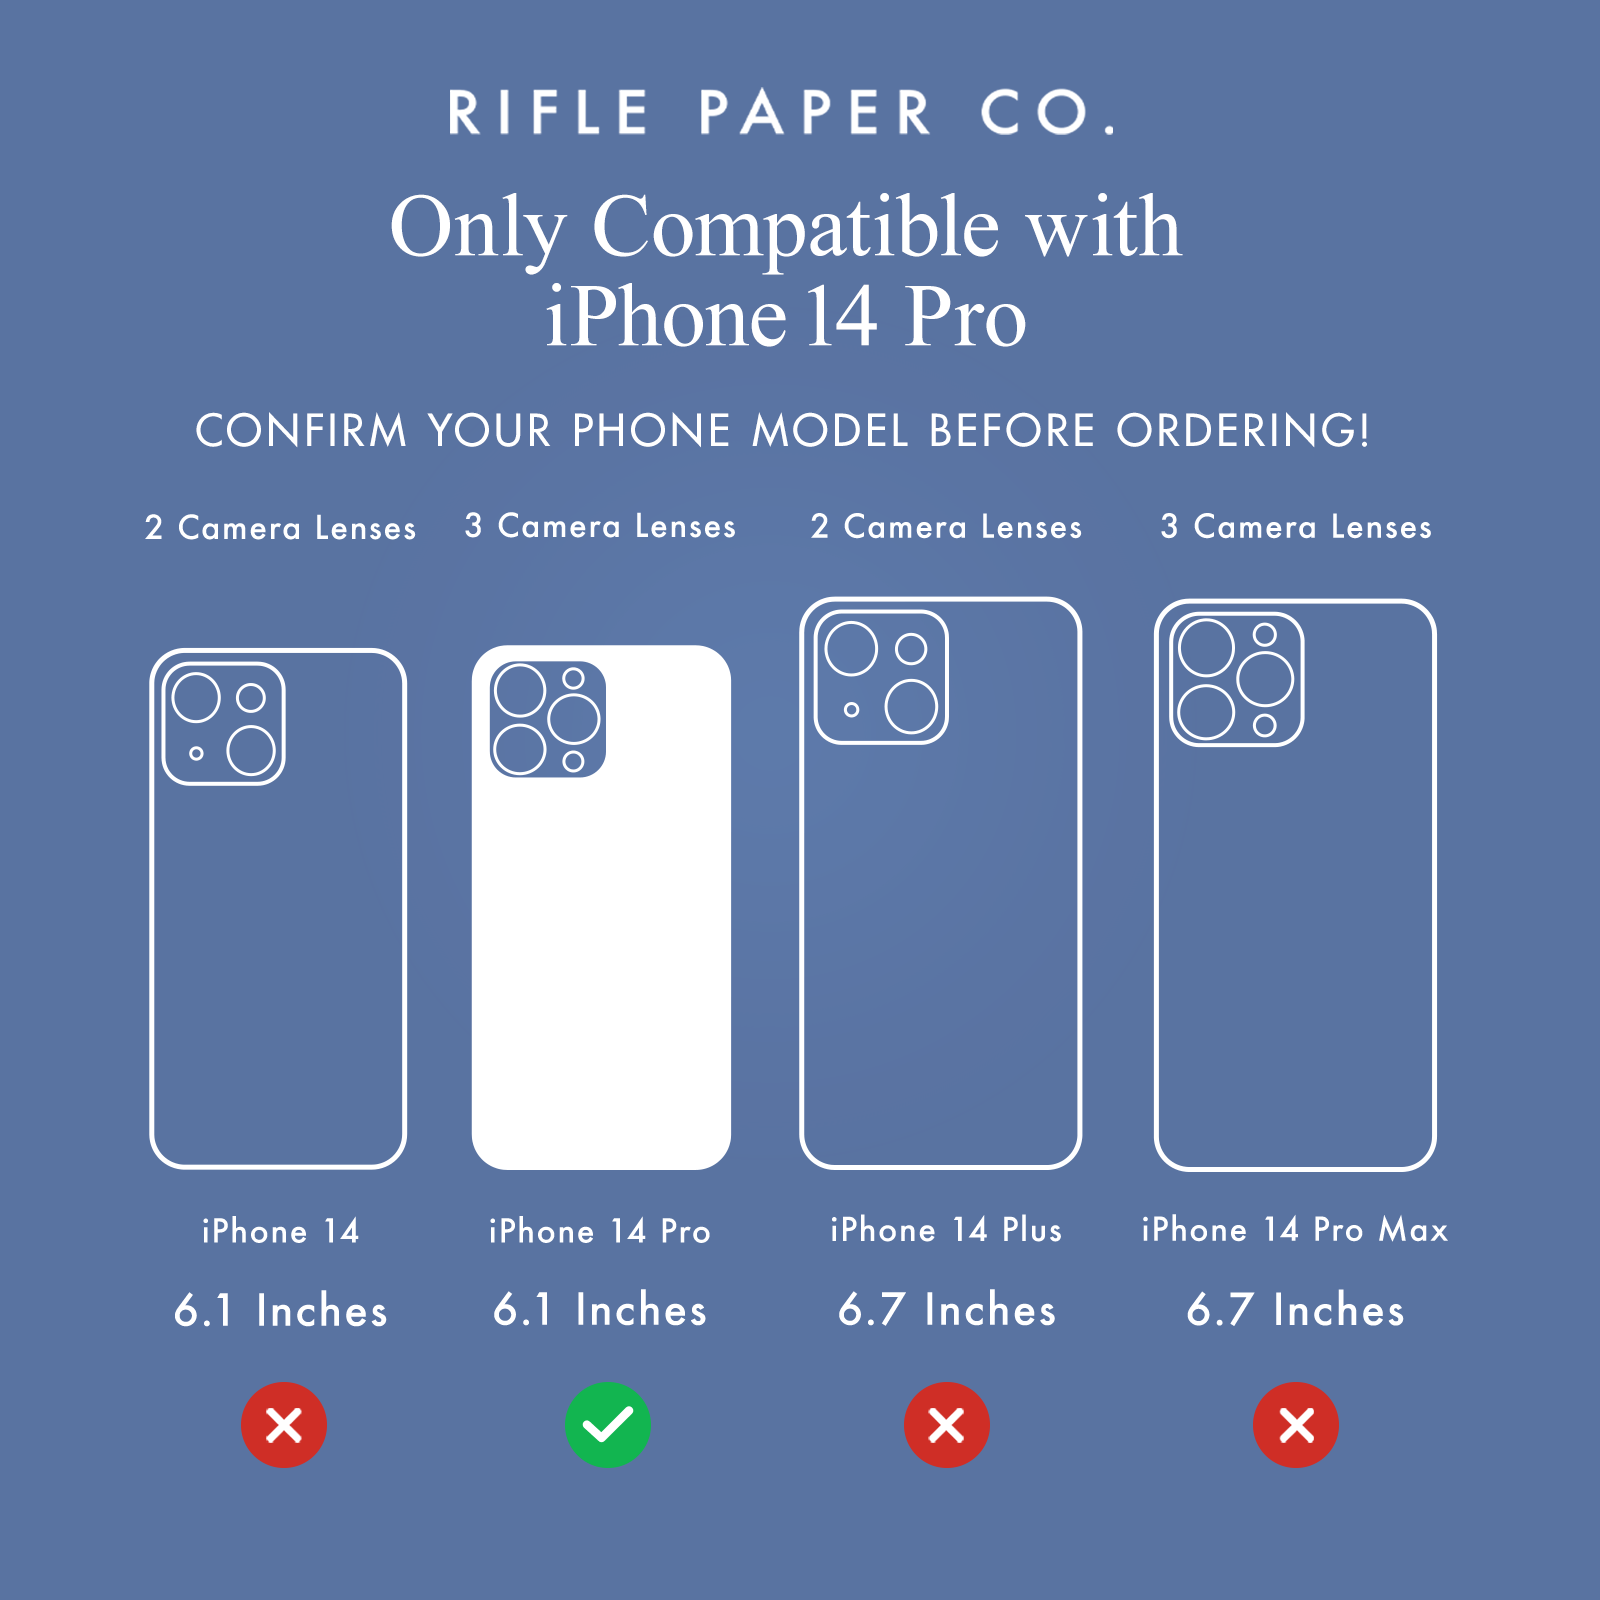 RIFLE PAPER CO. ONLY COMPATIBLE WITH IPHONE 14 PRO. CONFIRM YOUR PHONE MODEL BEFORE ORDERING.